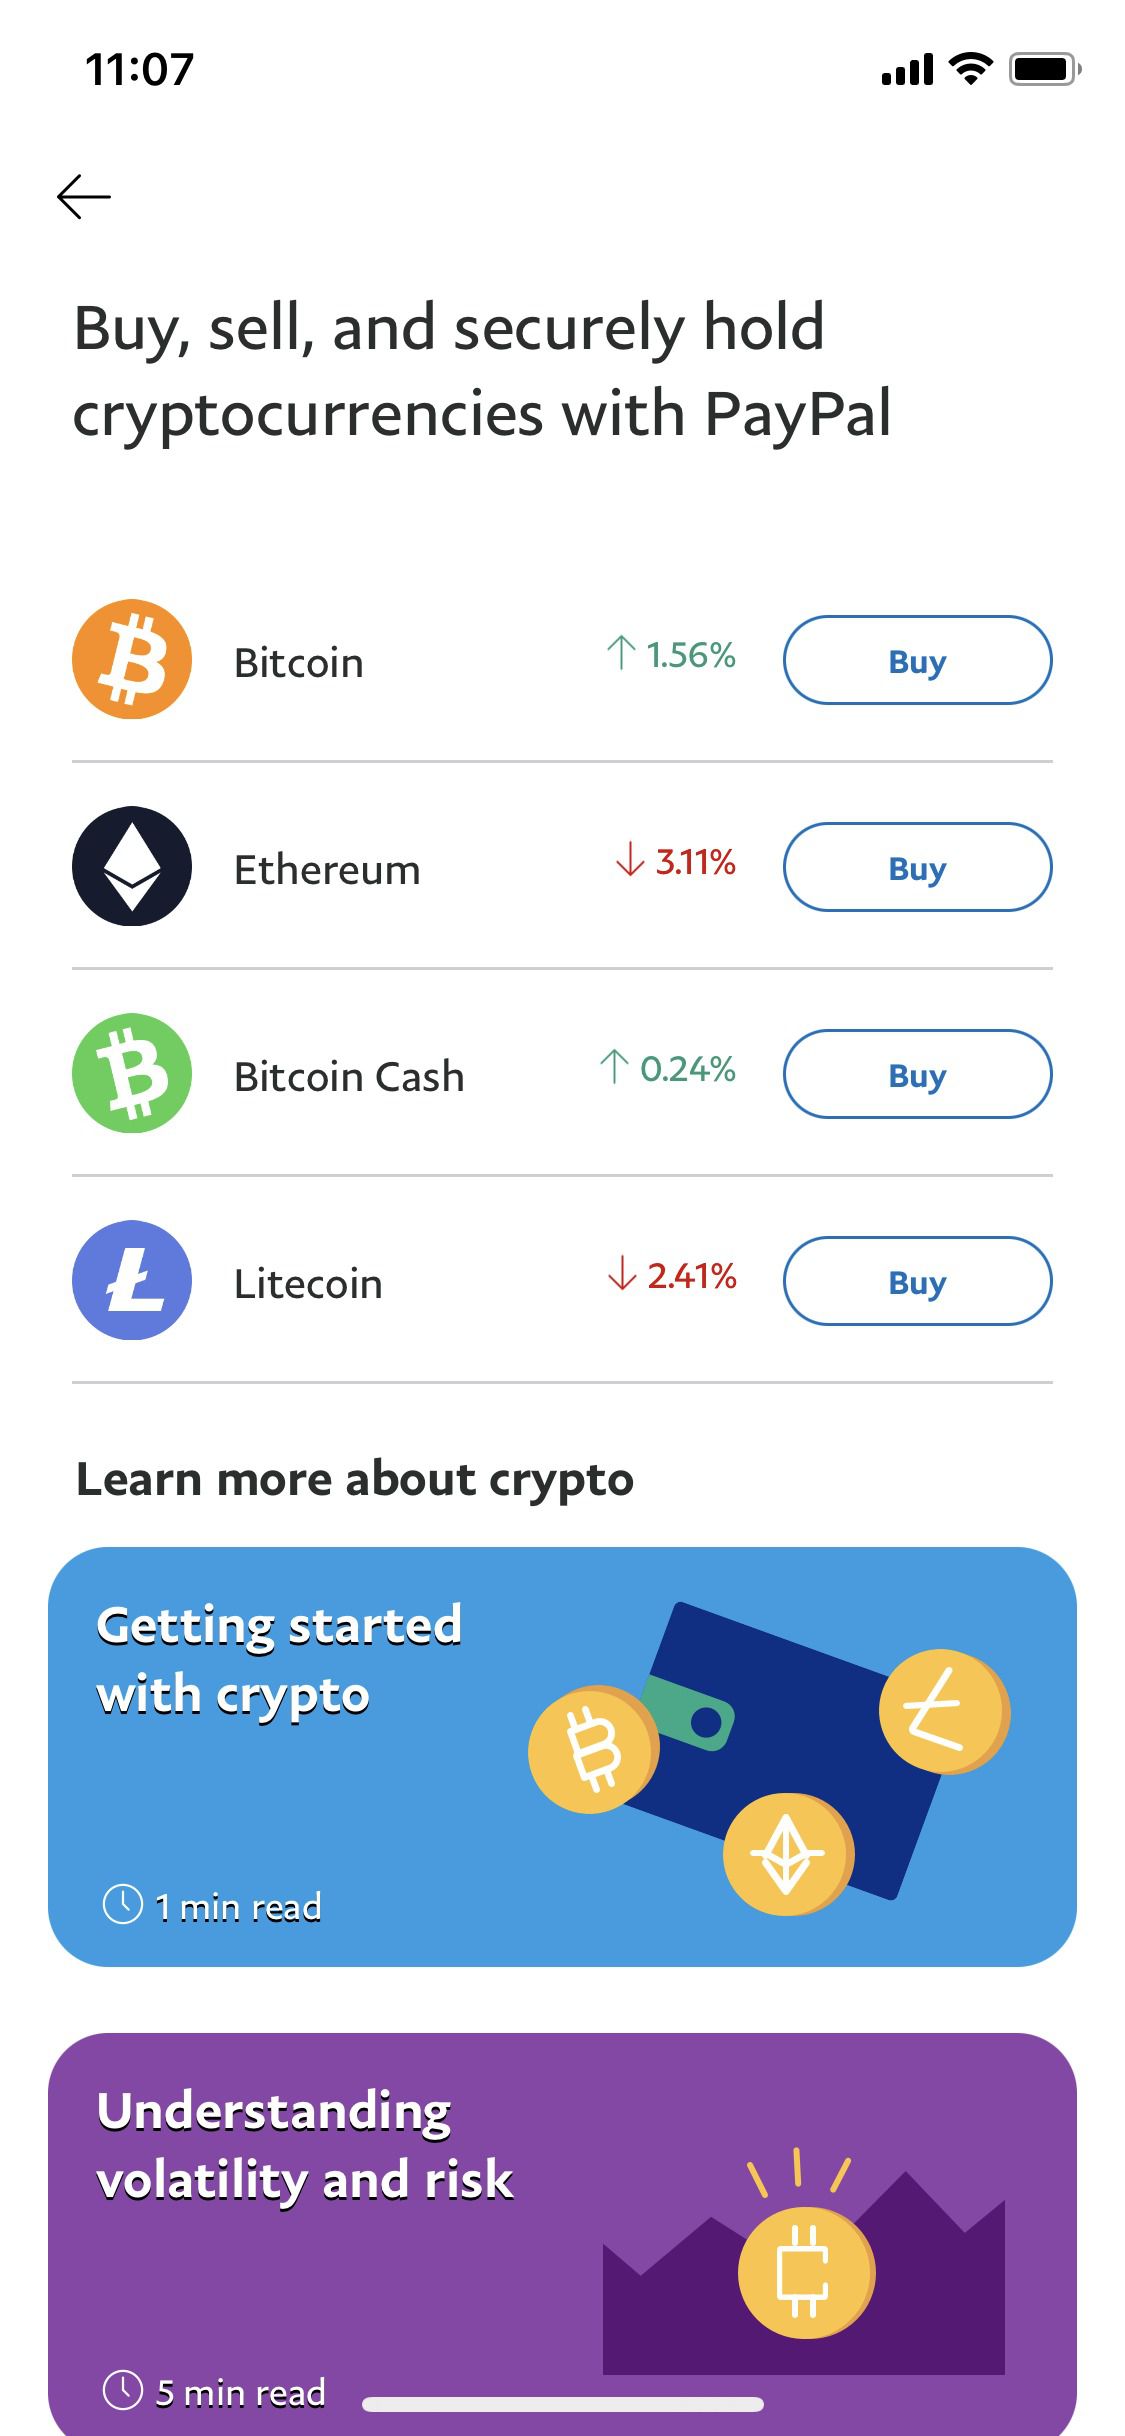 Buy Bitcoin With PayPal Instantly - Find Your Best Options